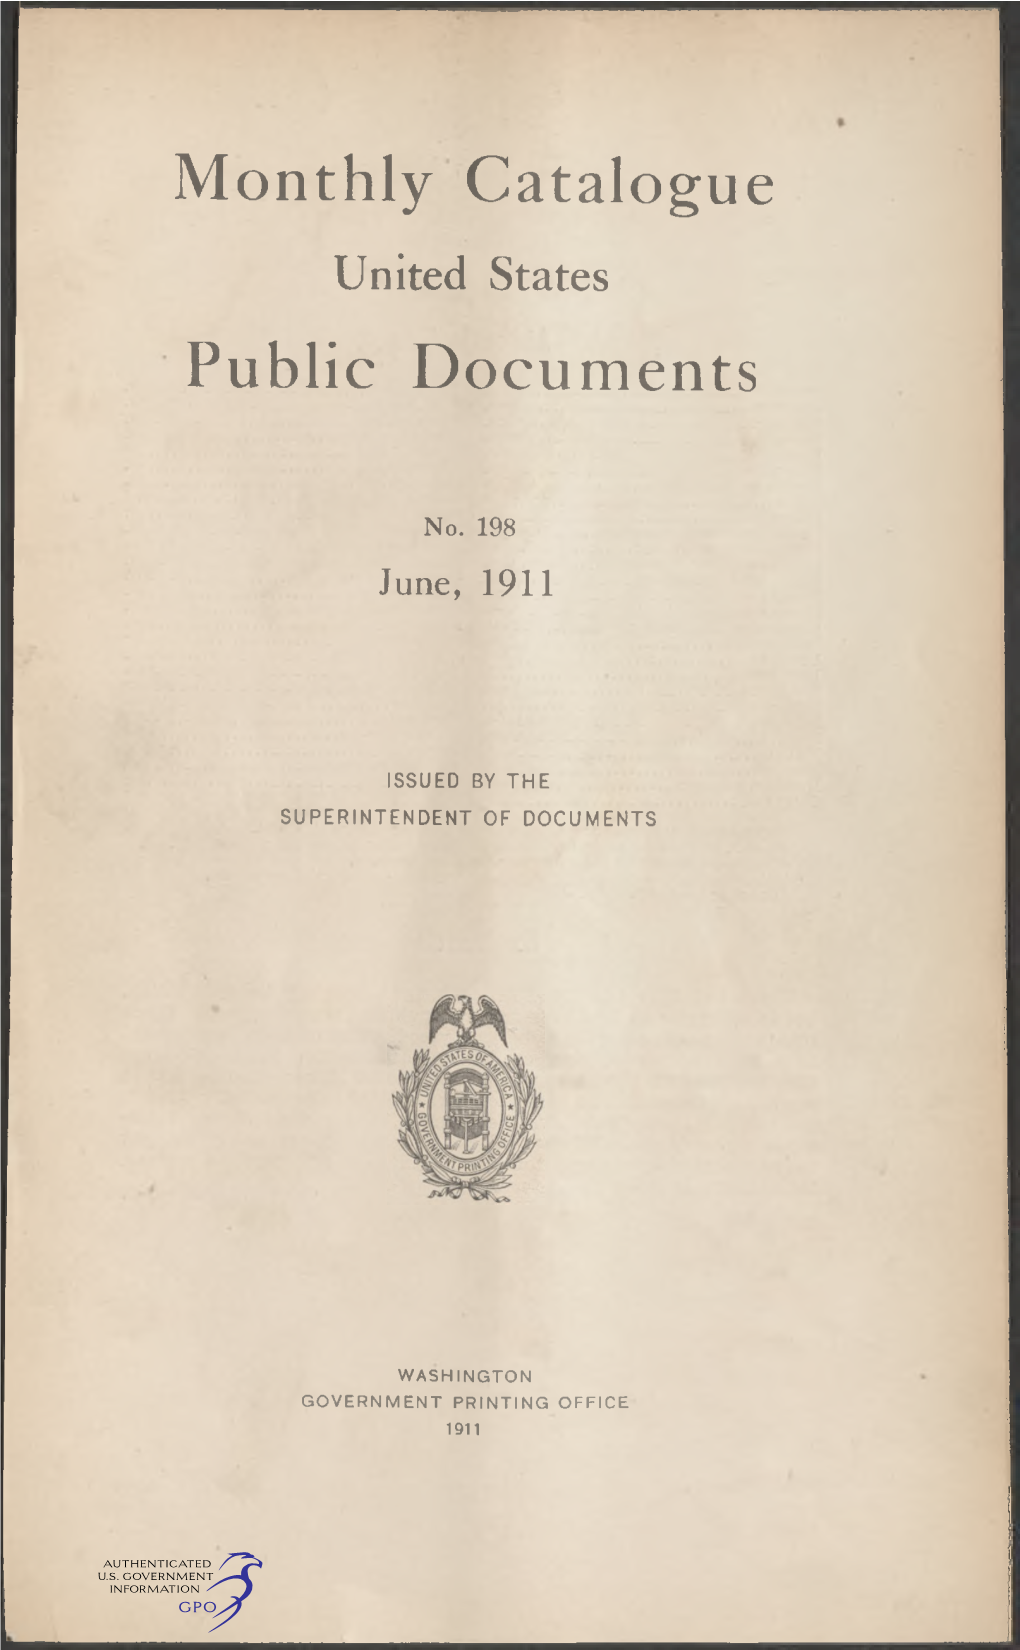 Monthly Catalogue, United States Public Documents, June 1911